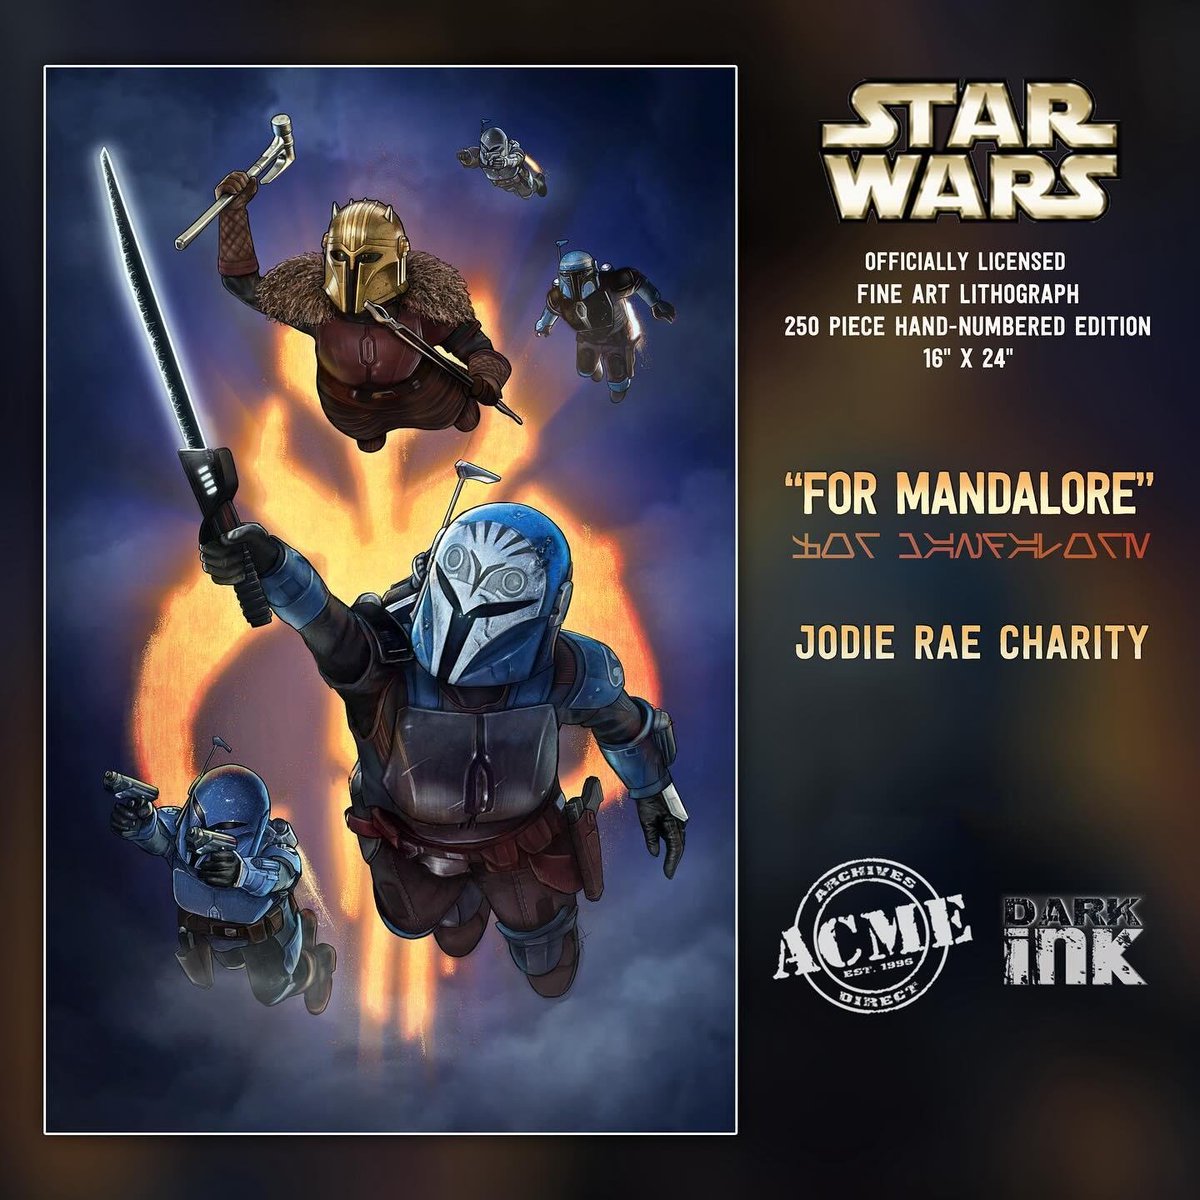 Jodie Rae Charity has been added to our #artfulepcot signing lineup for this Wednesday the 31st! Find her and 'For Mandalore' in person at our Japan location in EPCOT! View the full schedule: tinyurl.com/ACMEFOTA2024 'For Mandalore': tinyurl.com/ForMandaloreAC…